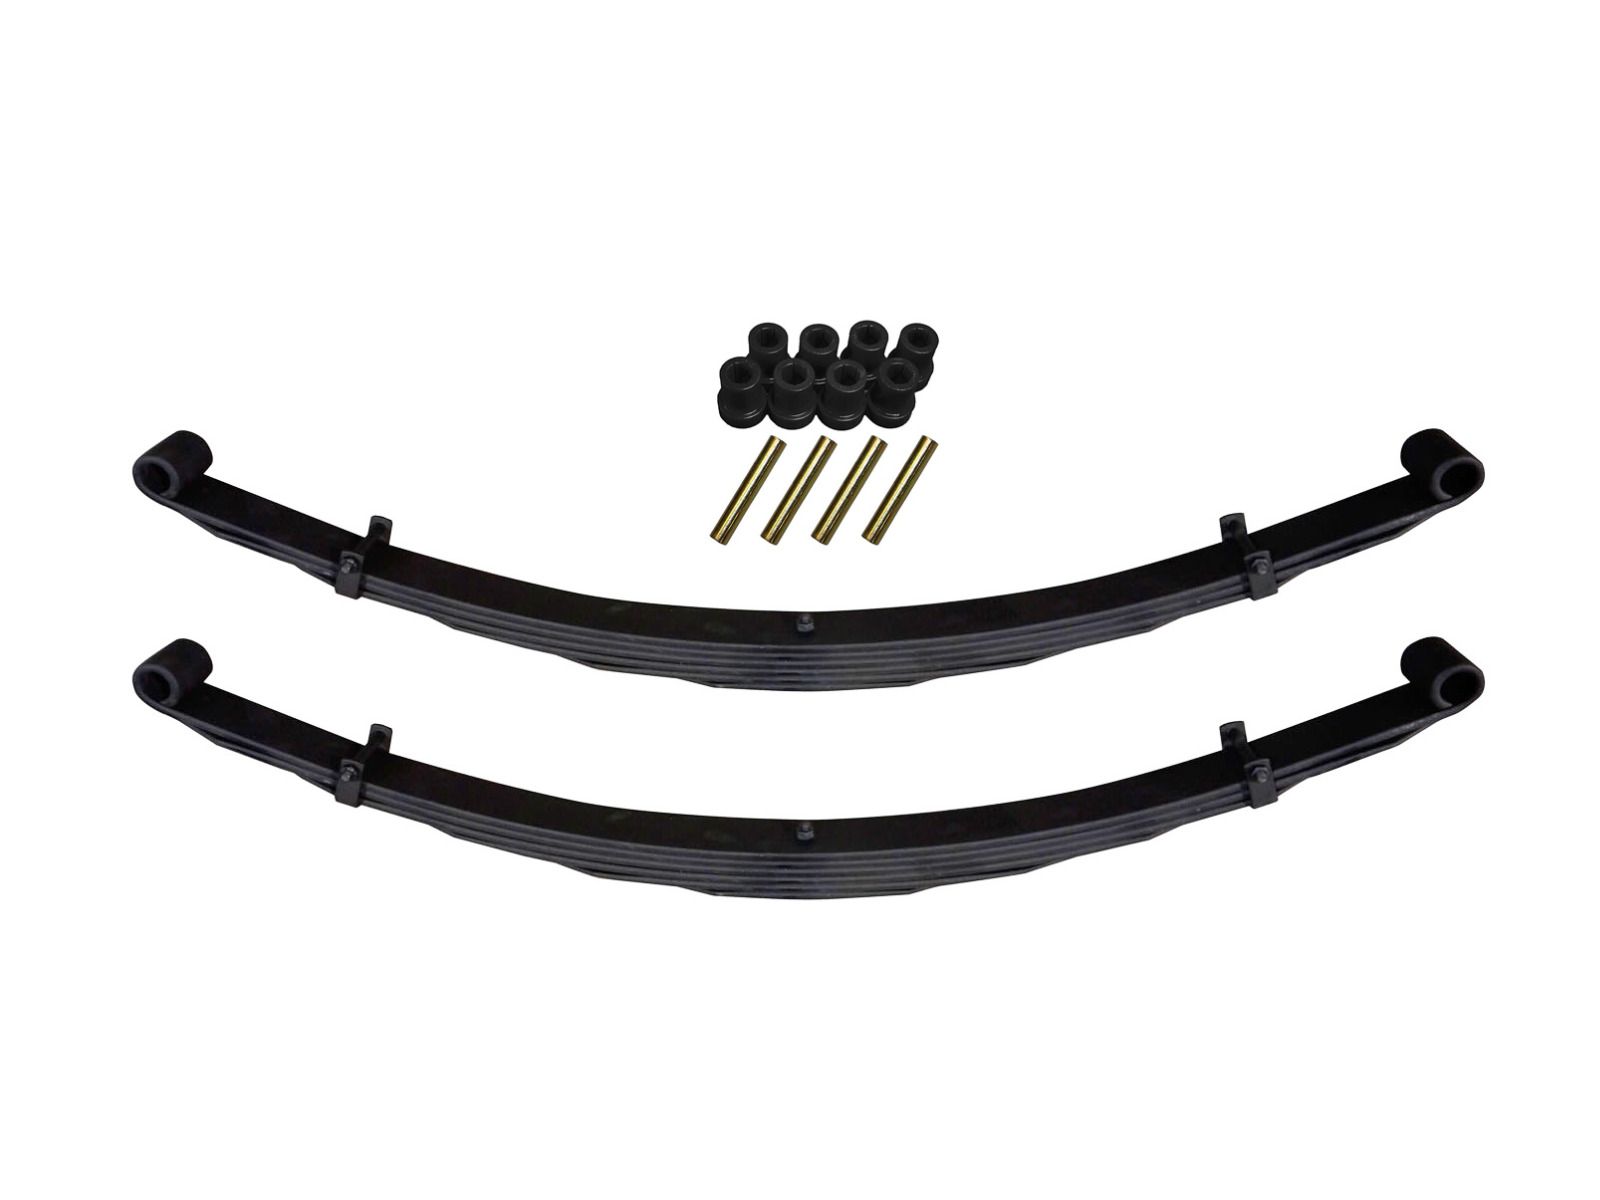 F250 1977-1979 Ford 4wd (Low Boy) - Front 6" Lift Leaf Spring Kit (with bushings) by Skyjacker